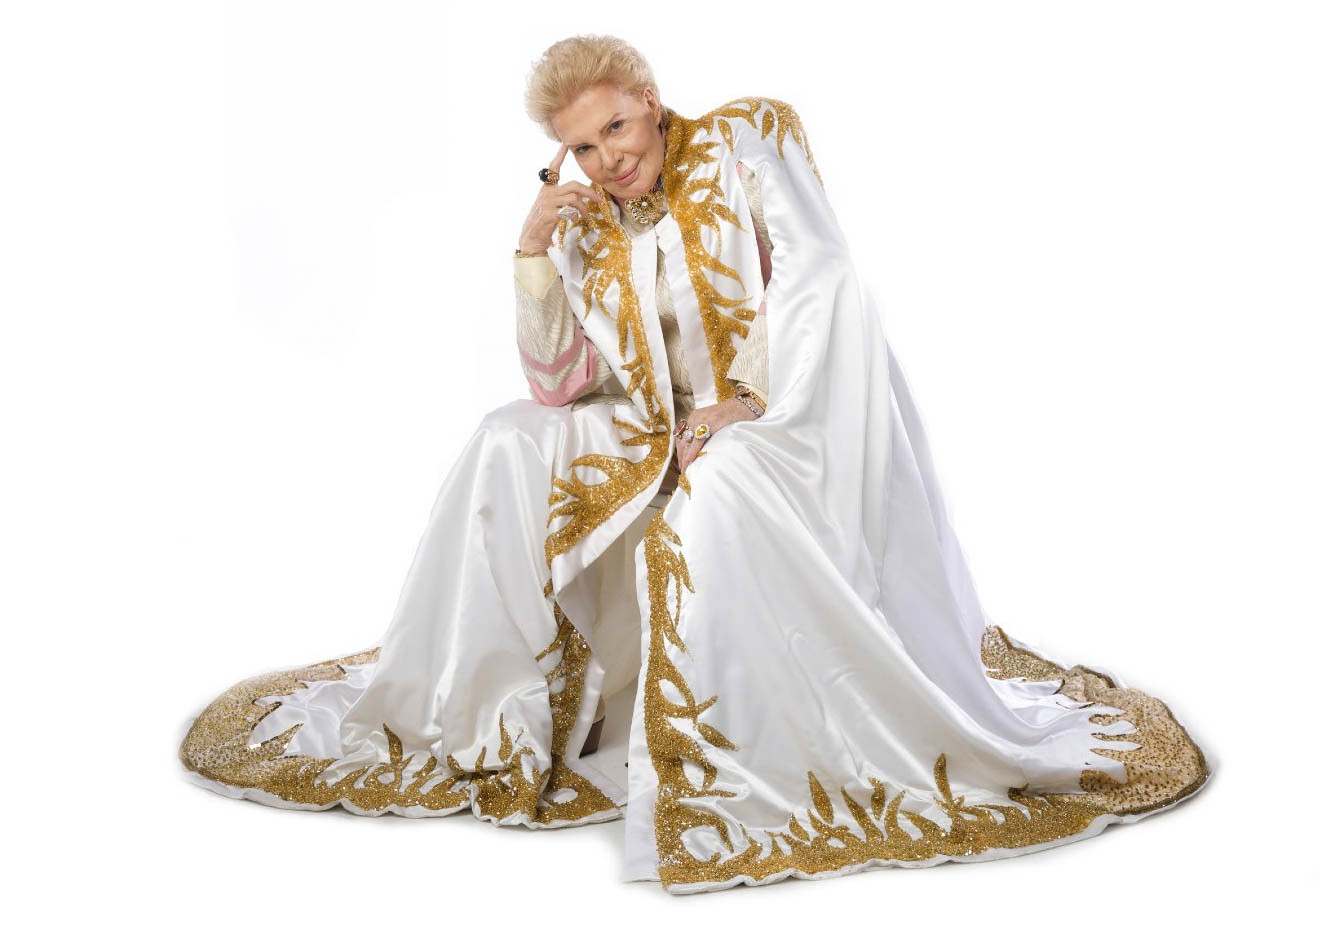 Walter Mercado appears in Mucho Mucho Amor by Cristina Costantini and Karee...